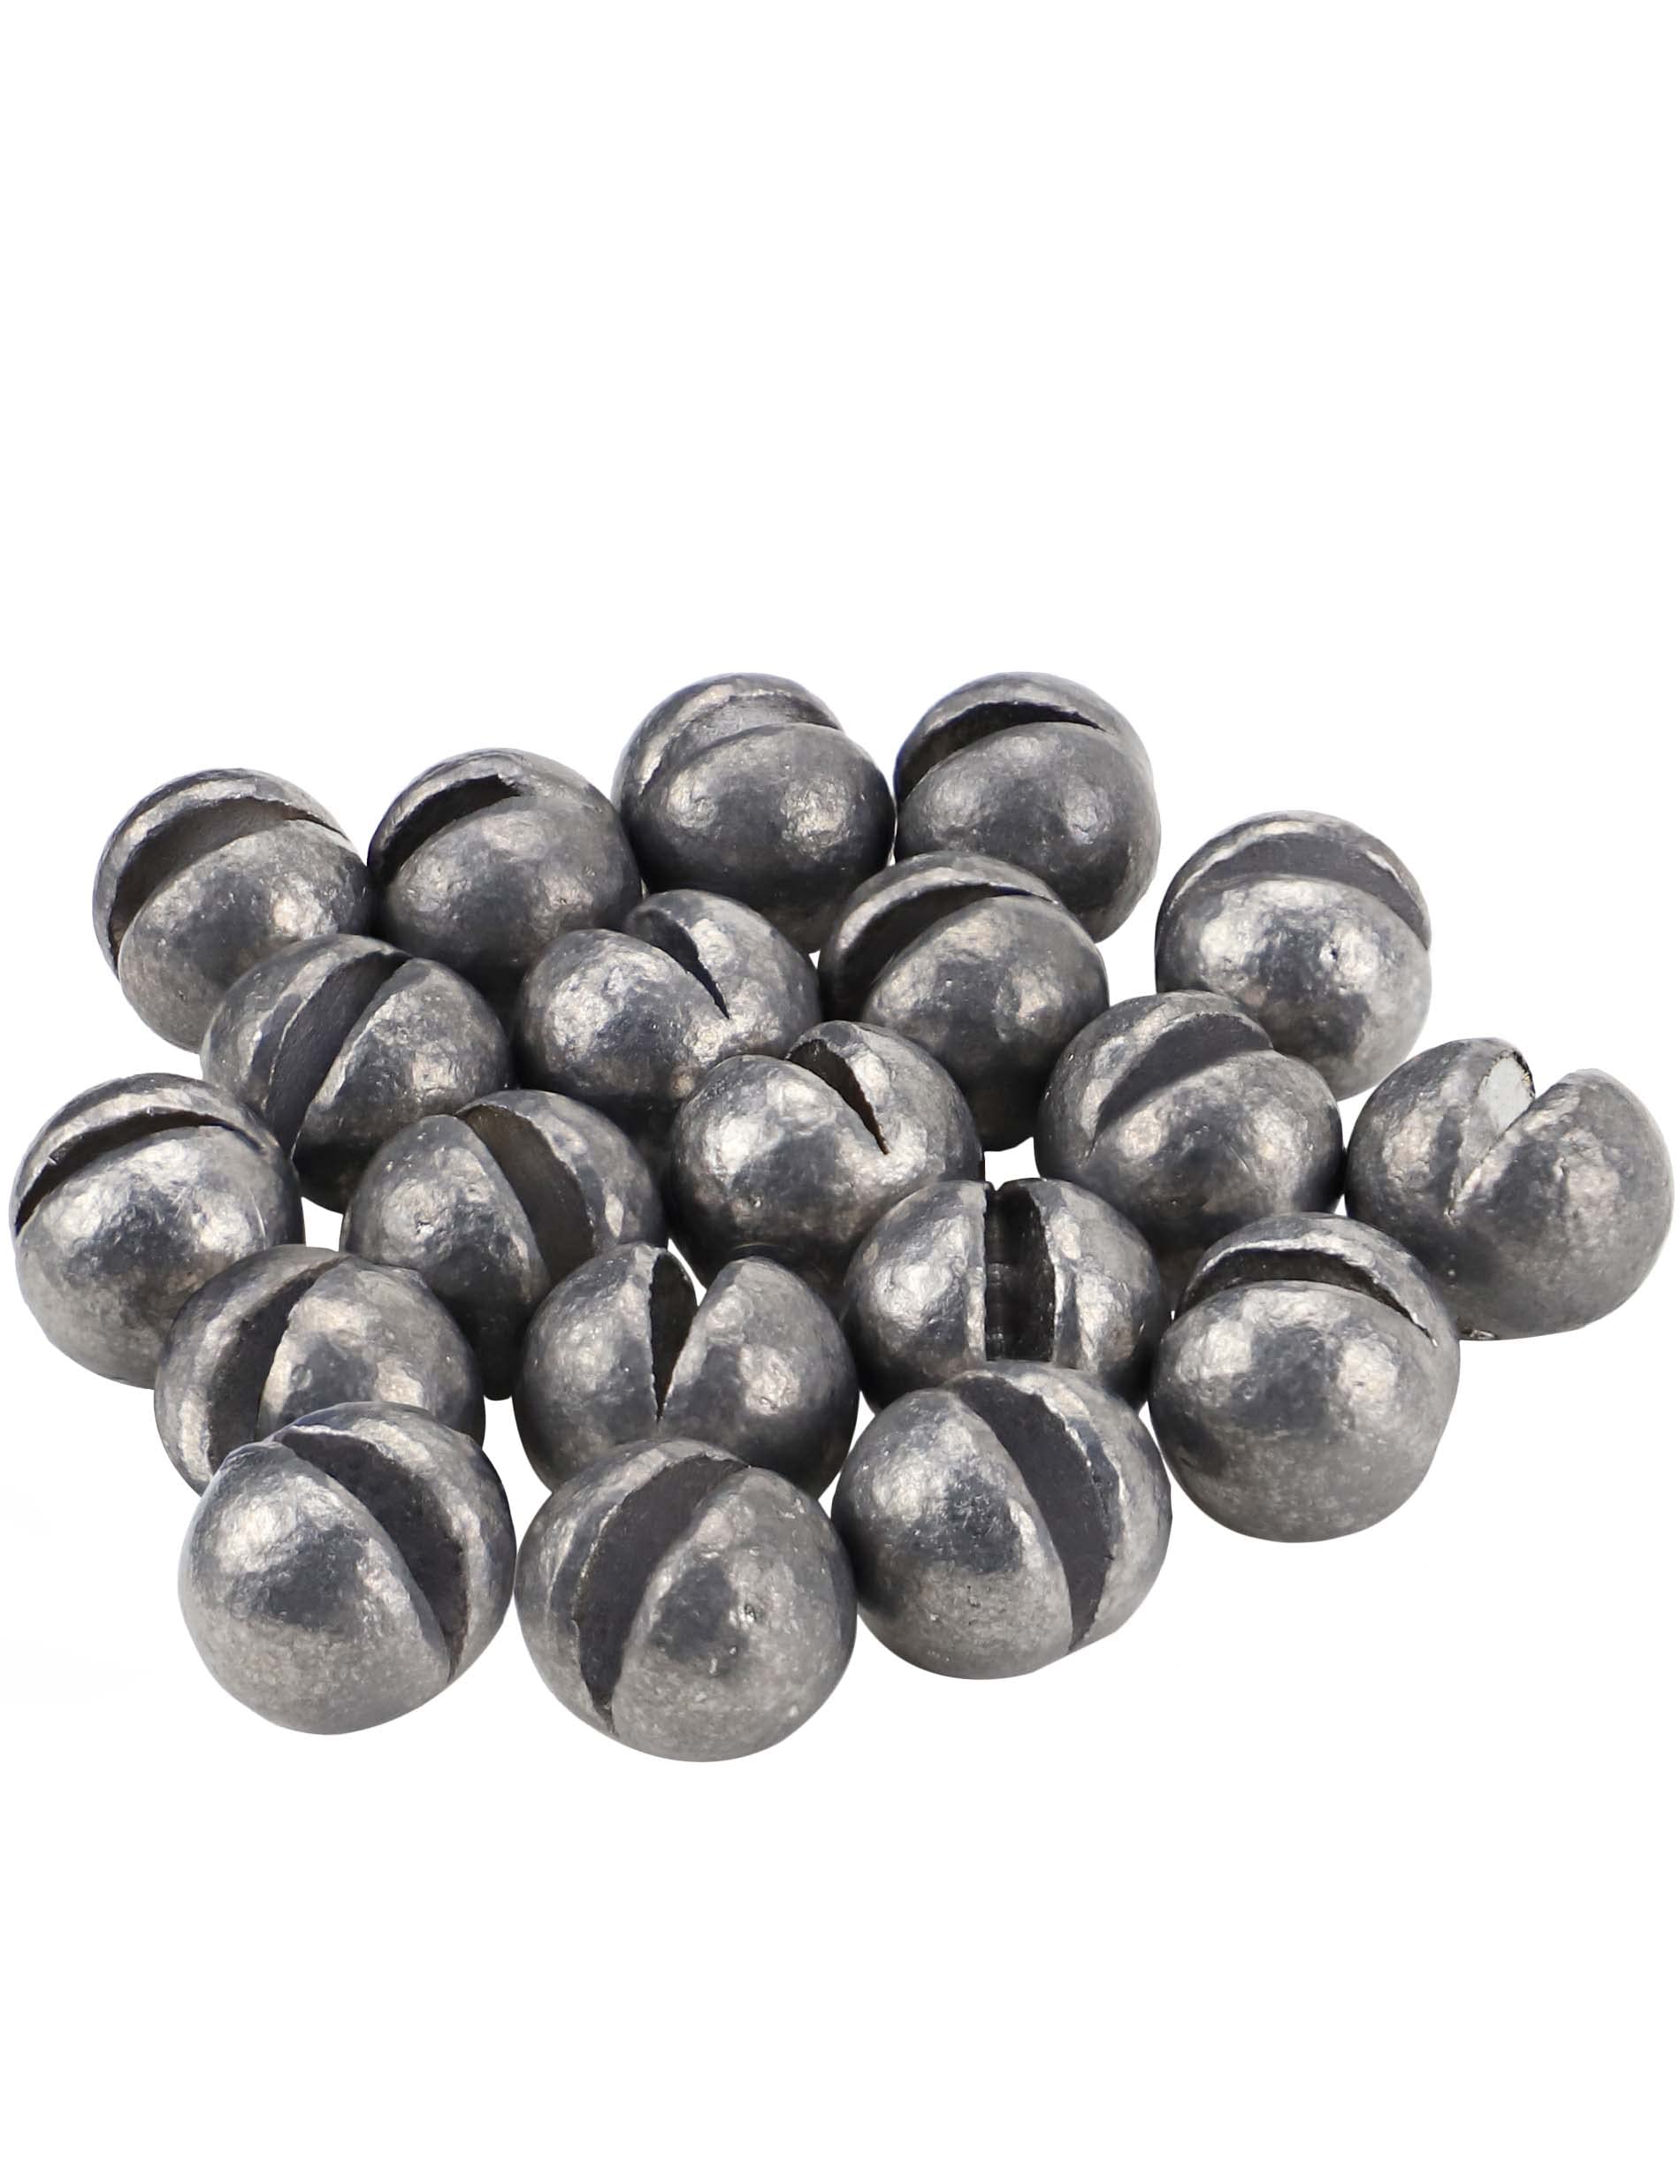 100PCS Round Fishing Weight Split Shot 1g-2g Egg Lead Sinkers Crappie Bass  Trout